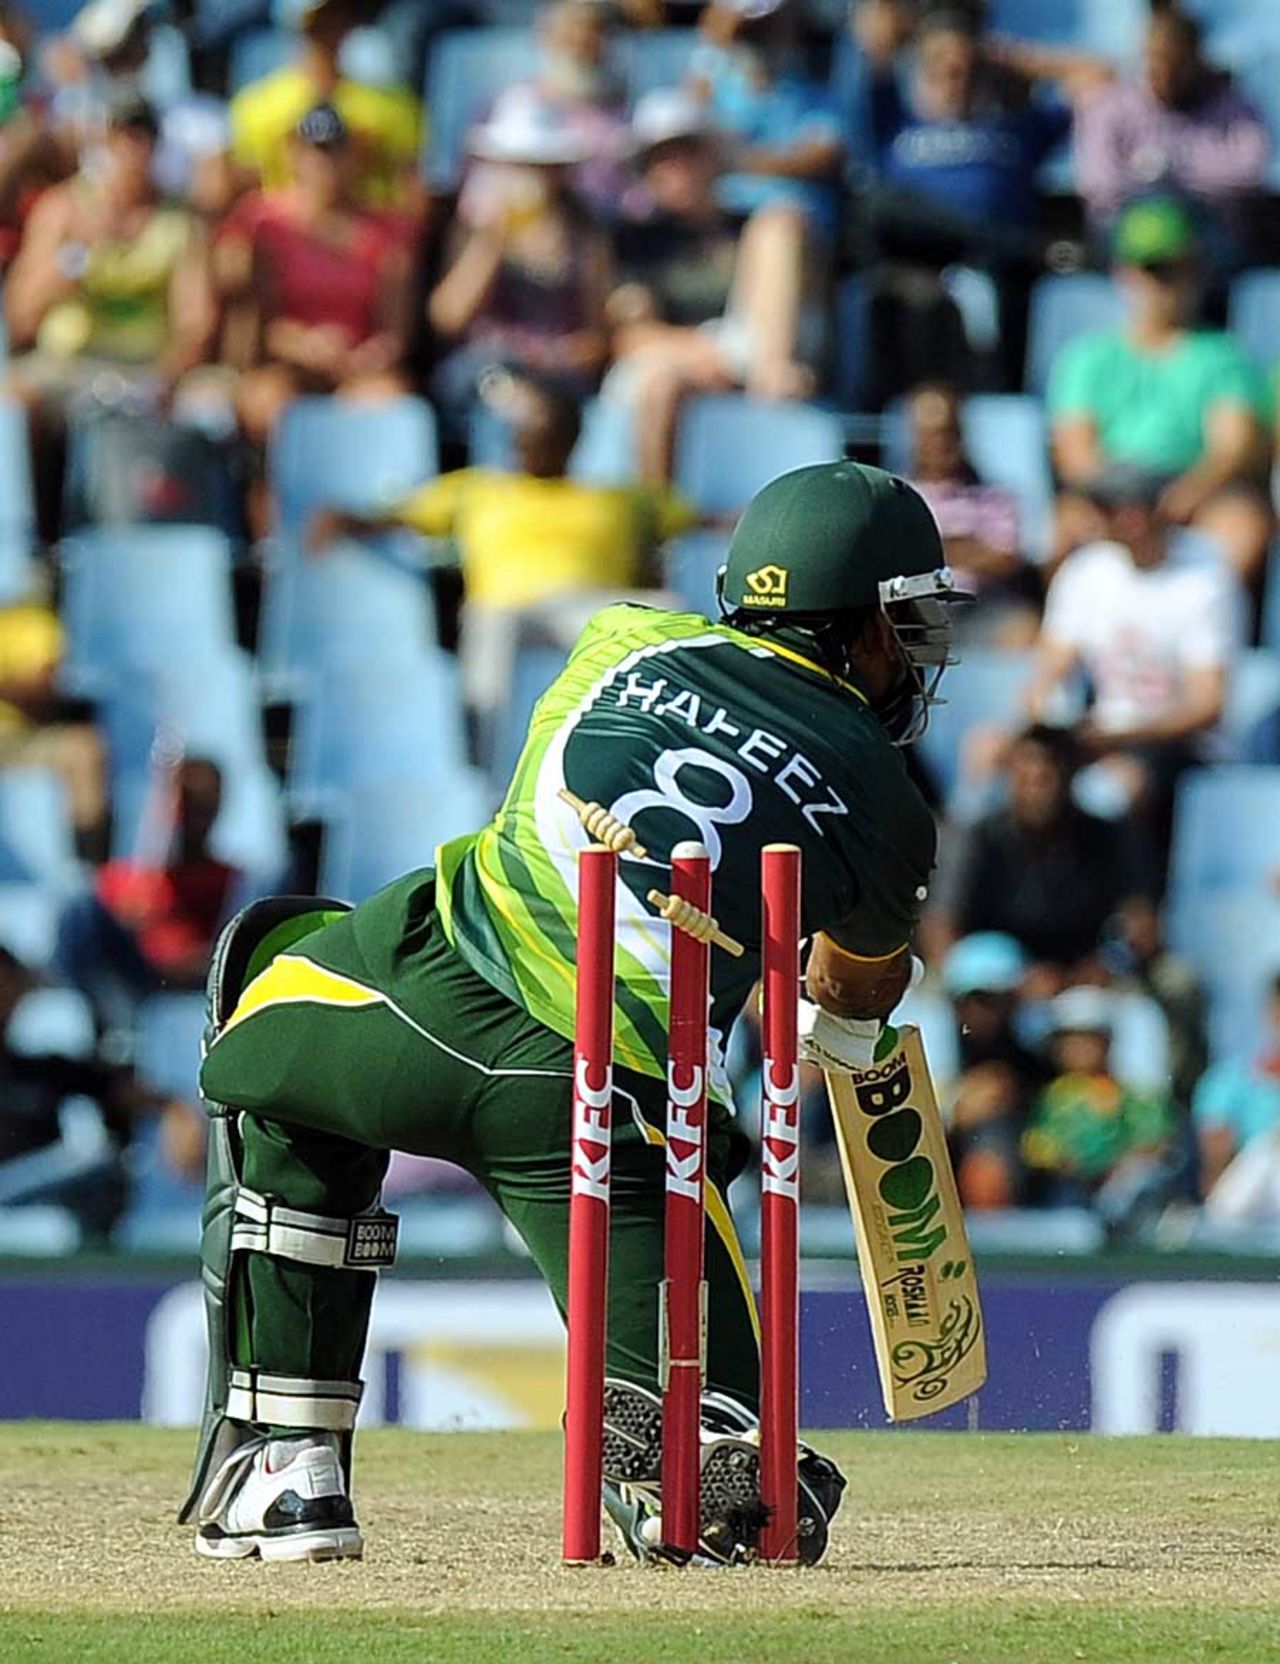 Mohammad Hafeez is hit wicket for 86, South Africa v Pakistan, 2nd T20I, Centurion, March 3, 2013